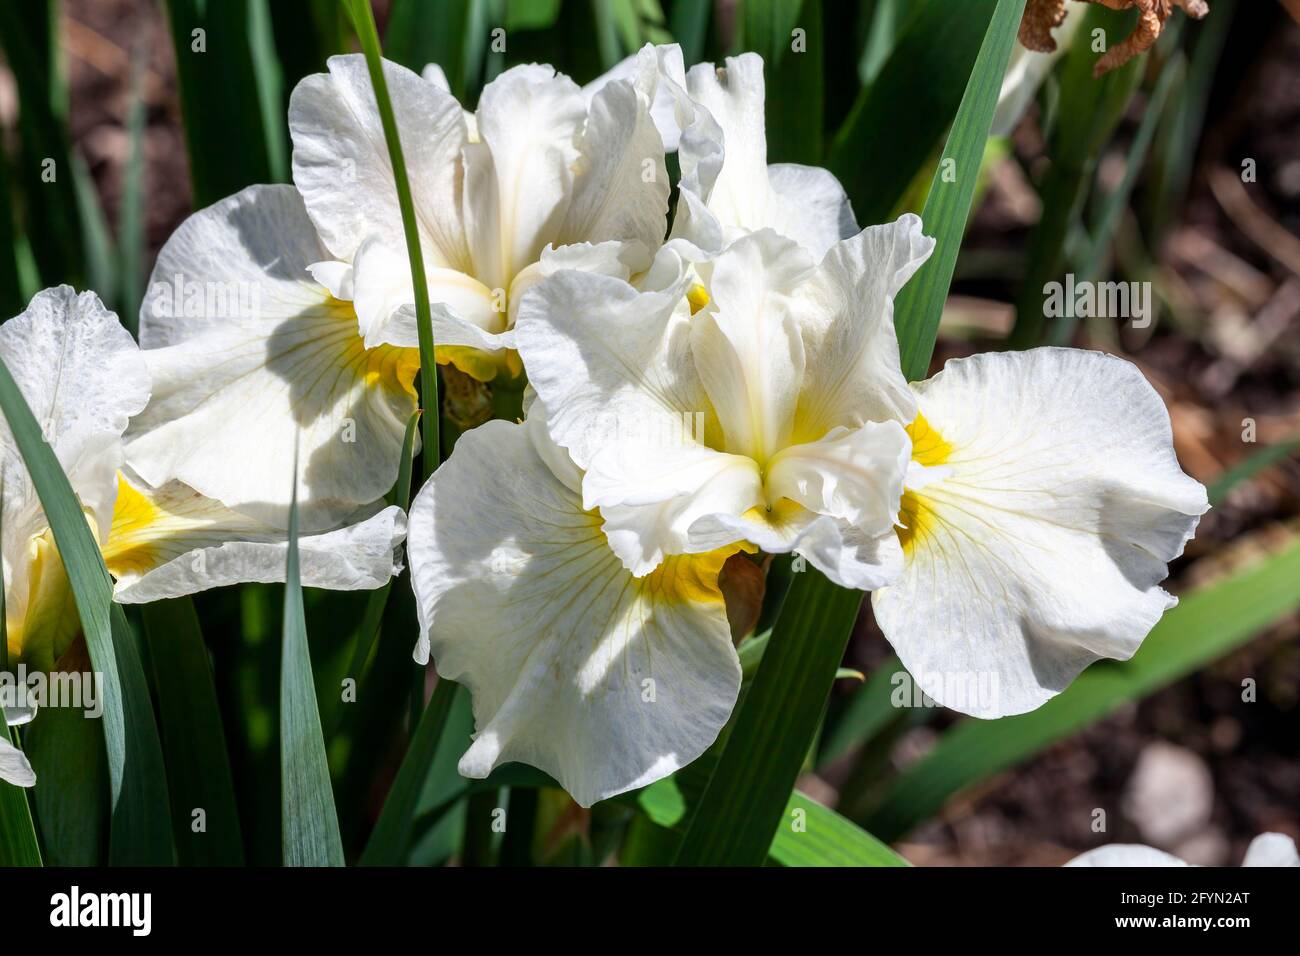 Iris sibirica 'Silver Queen' a summer flowering plant with a white summertime flower commonly known as Siberian flag, stock photo image Stock Photo